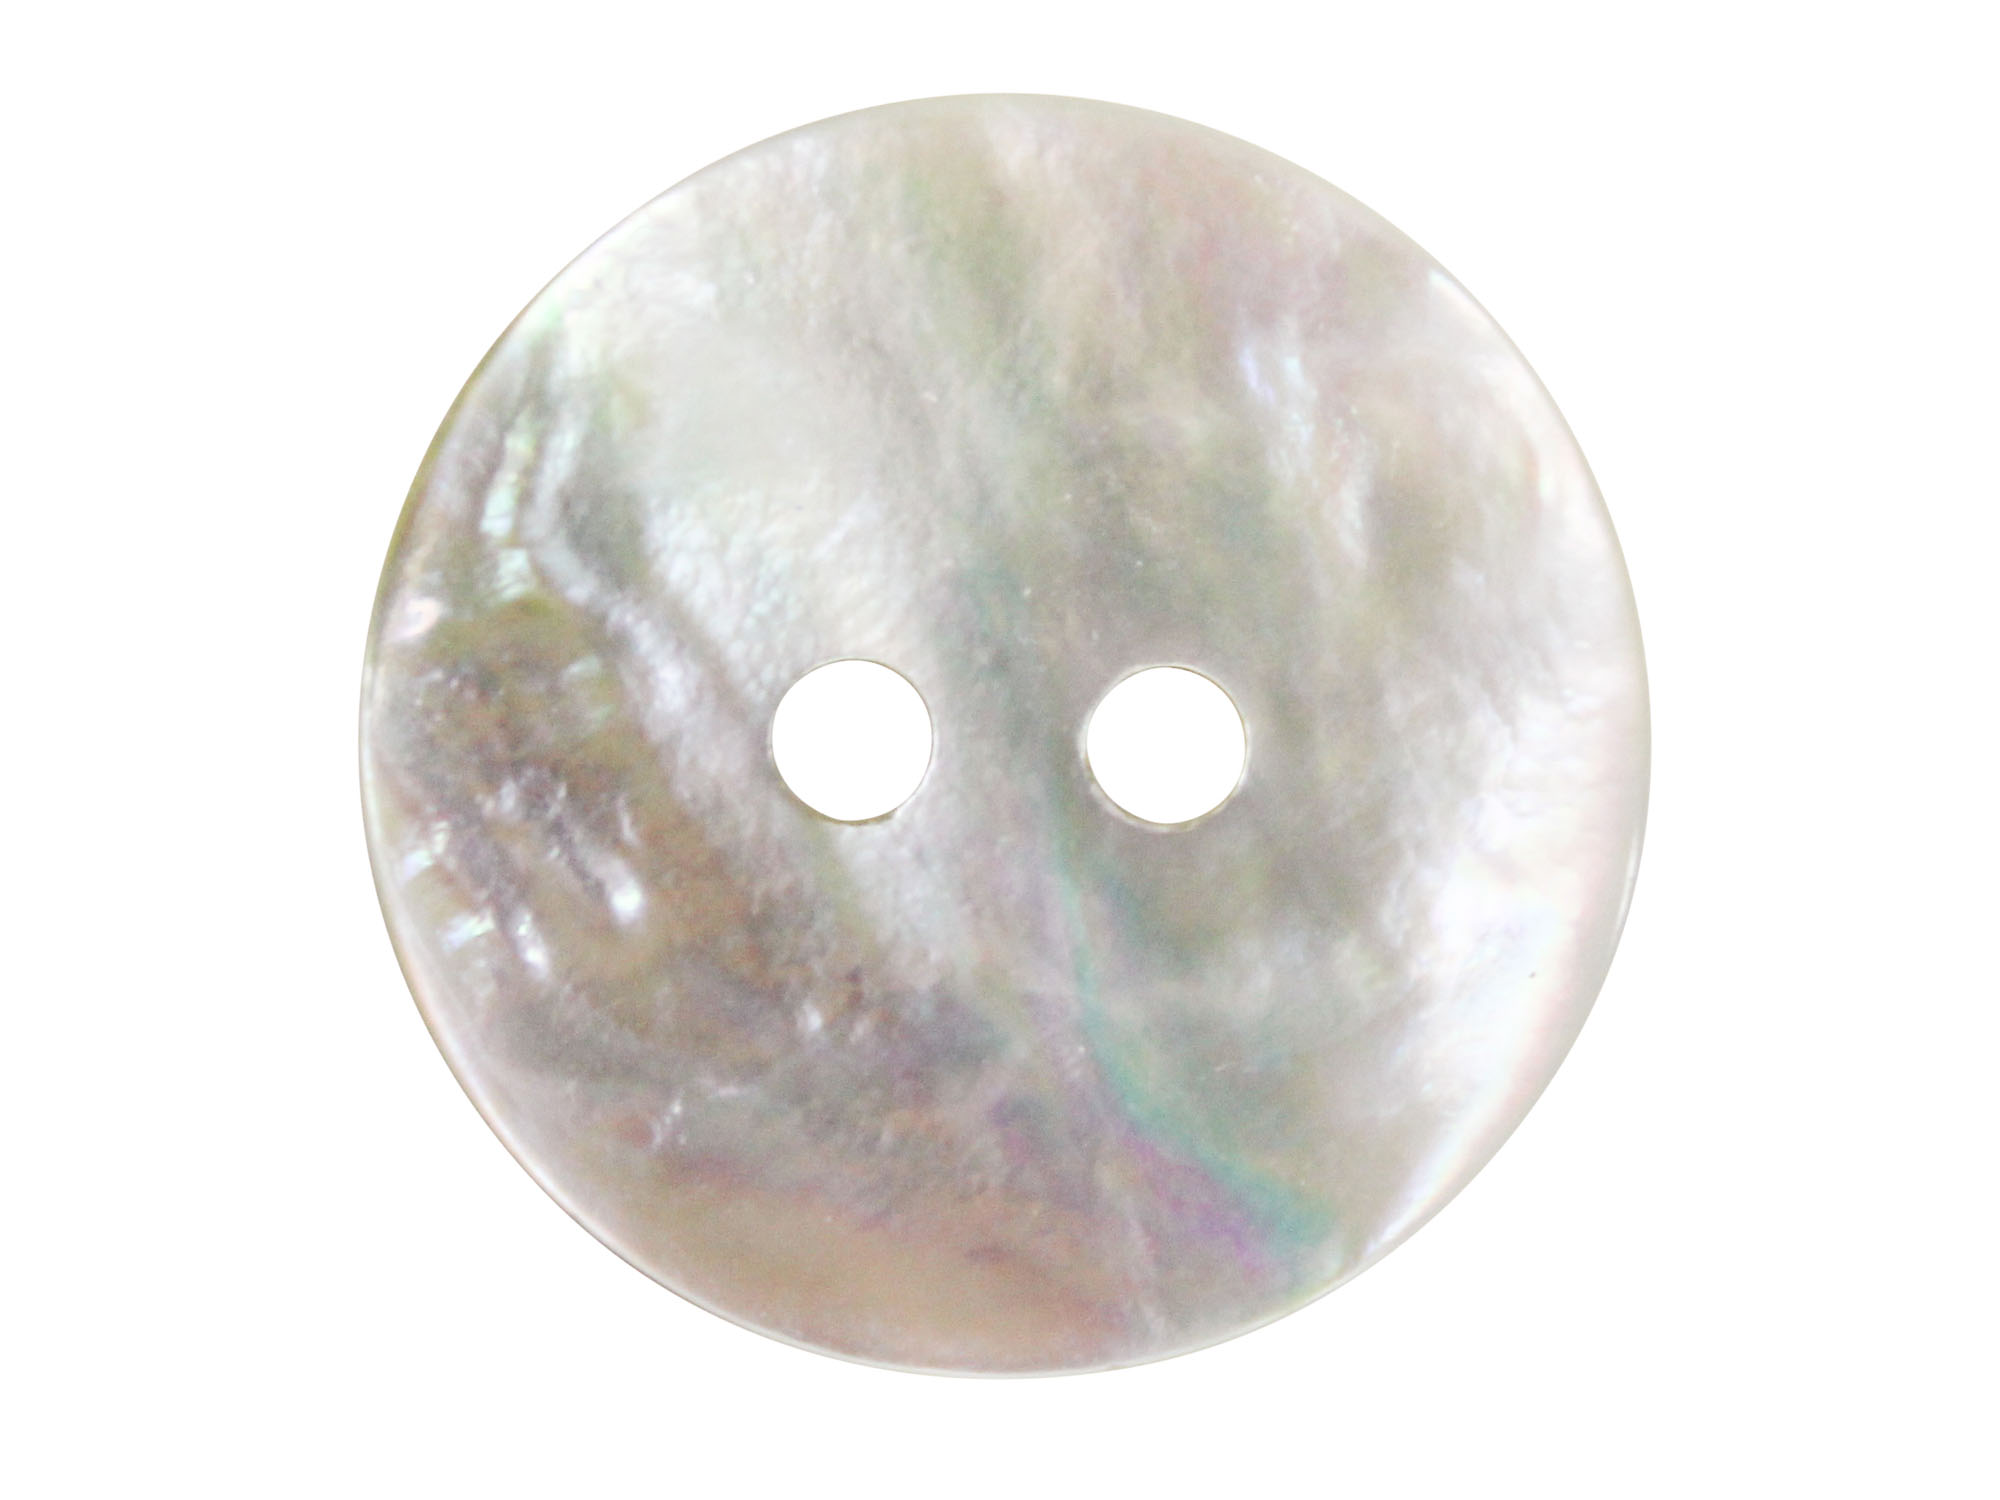 Akoya Mother of Pearl Button: 32L (20.5mm or 0.807") mother-of-pearl buttons